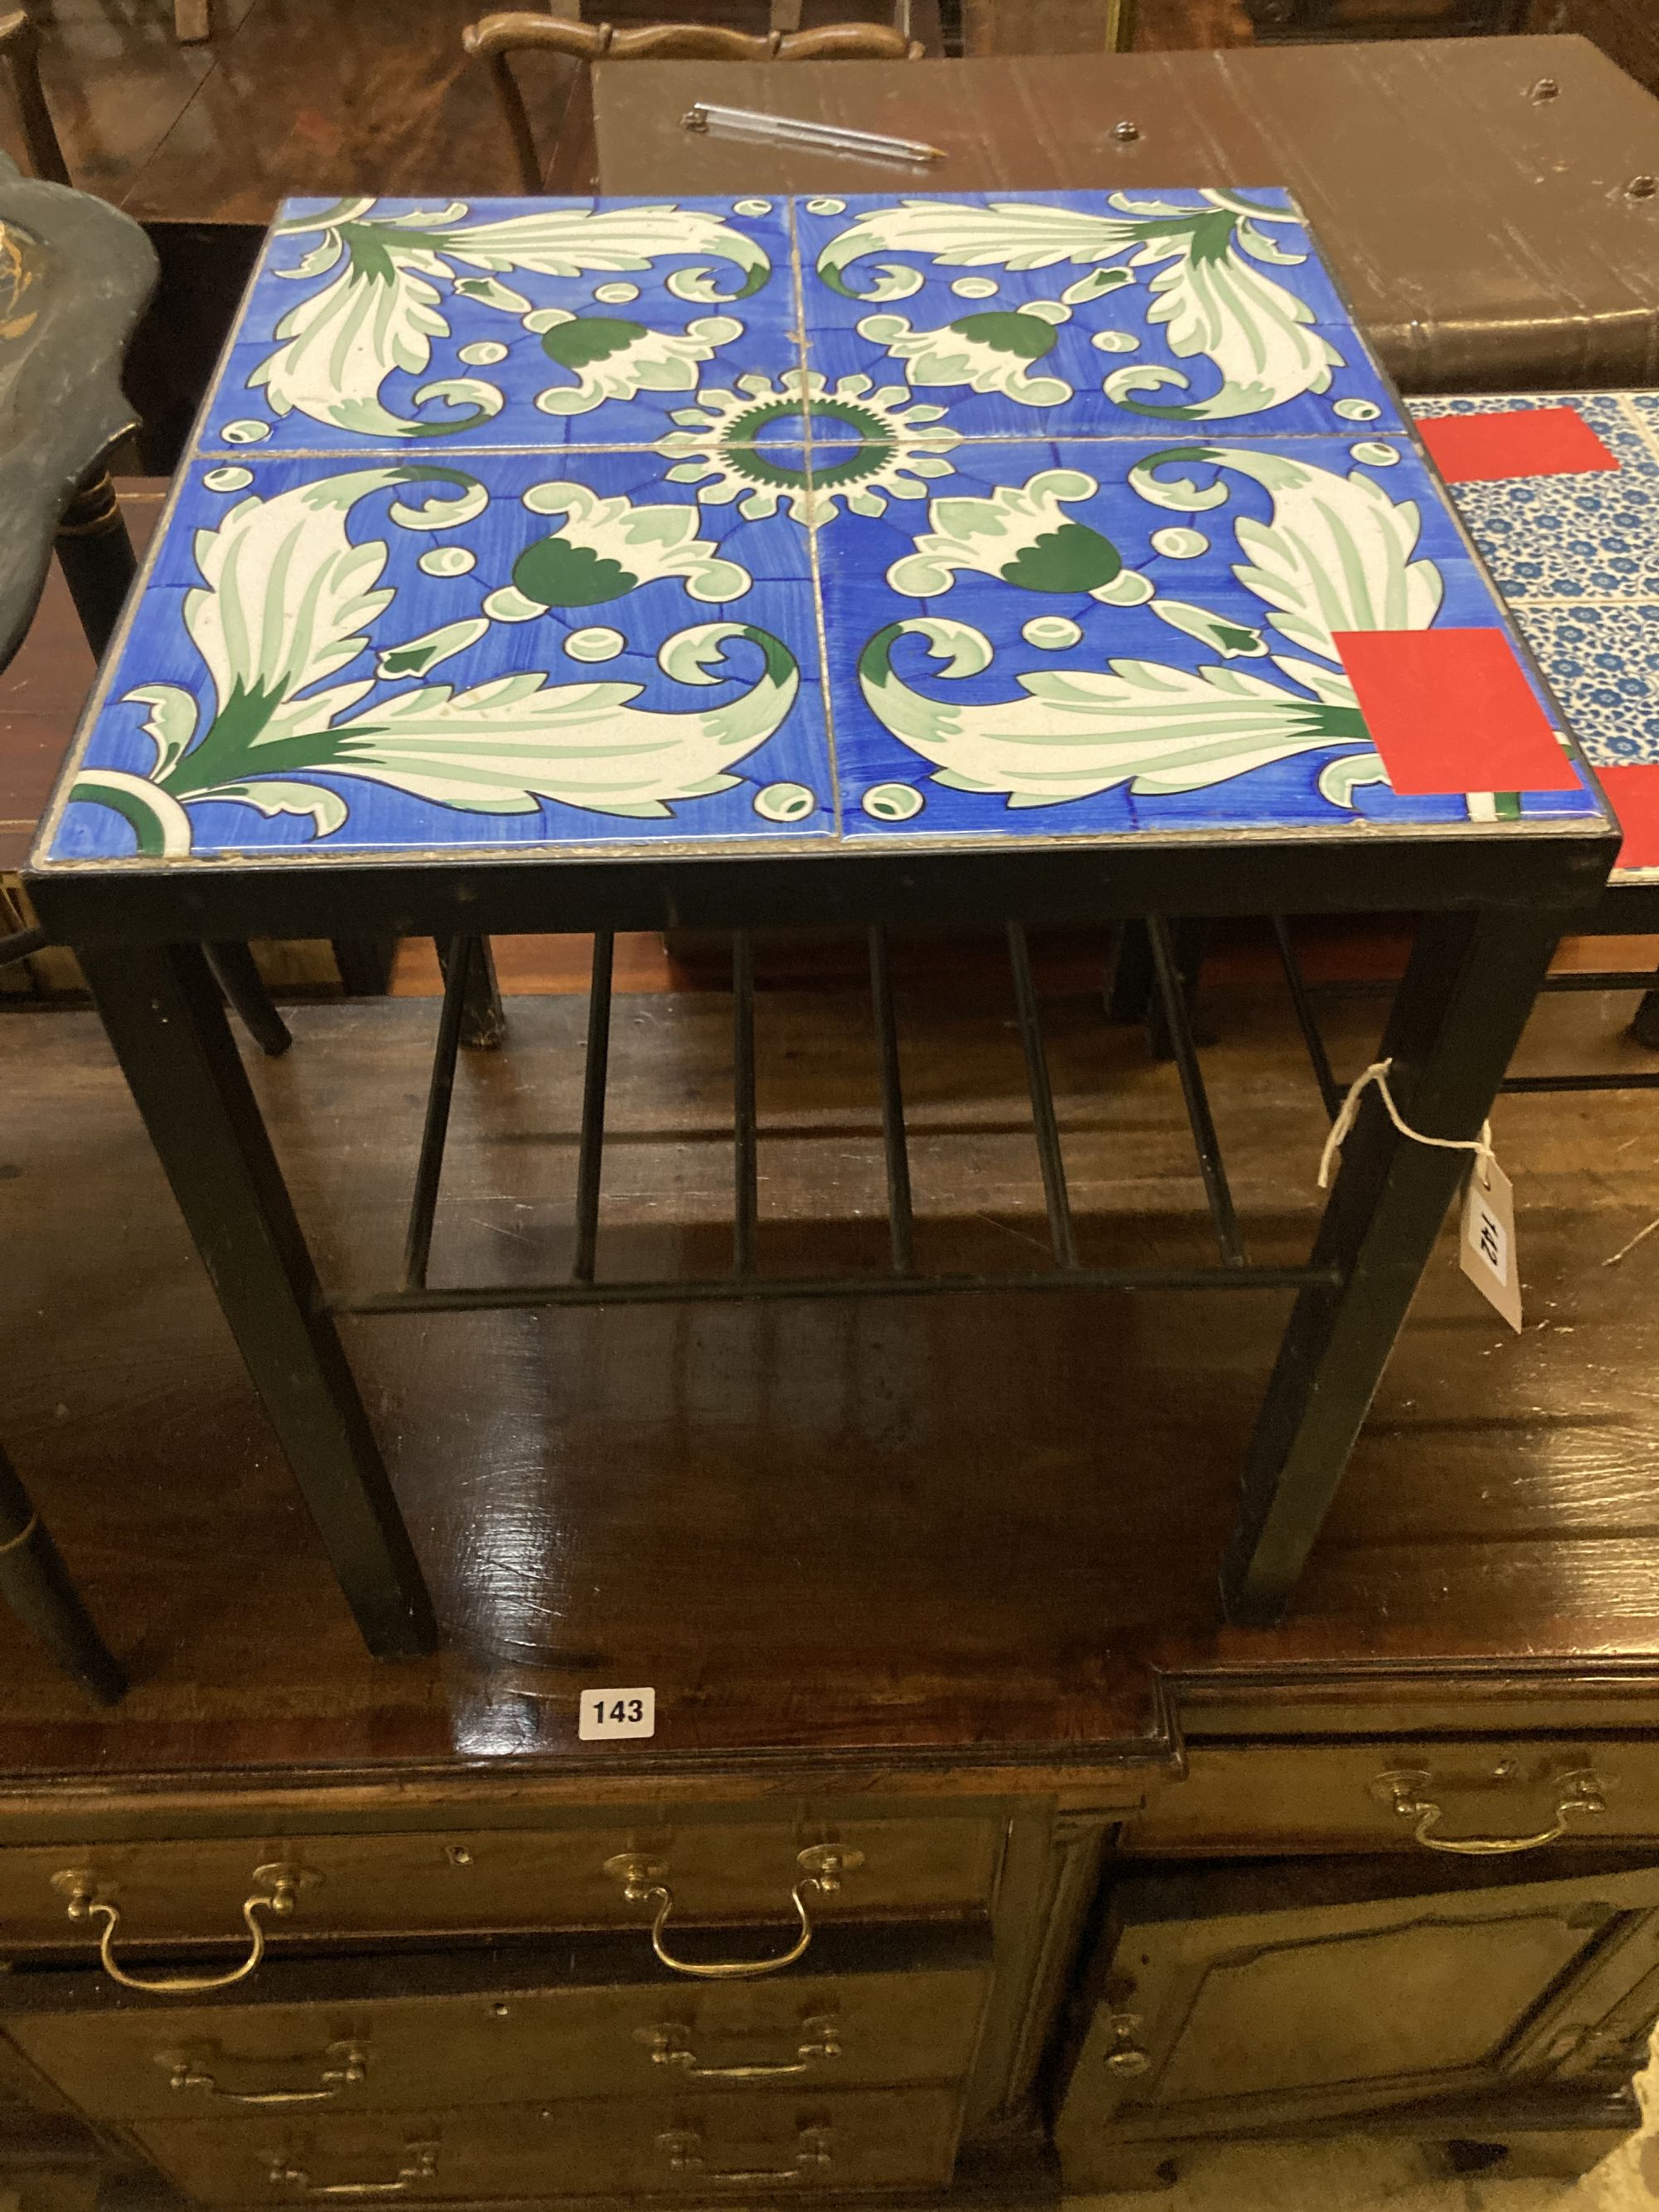 Two mid century design square tiled top occasional tables, larger 41cm, height 46cm